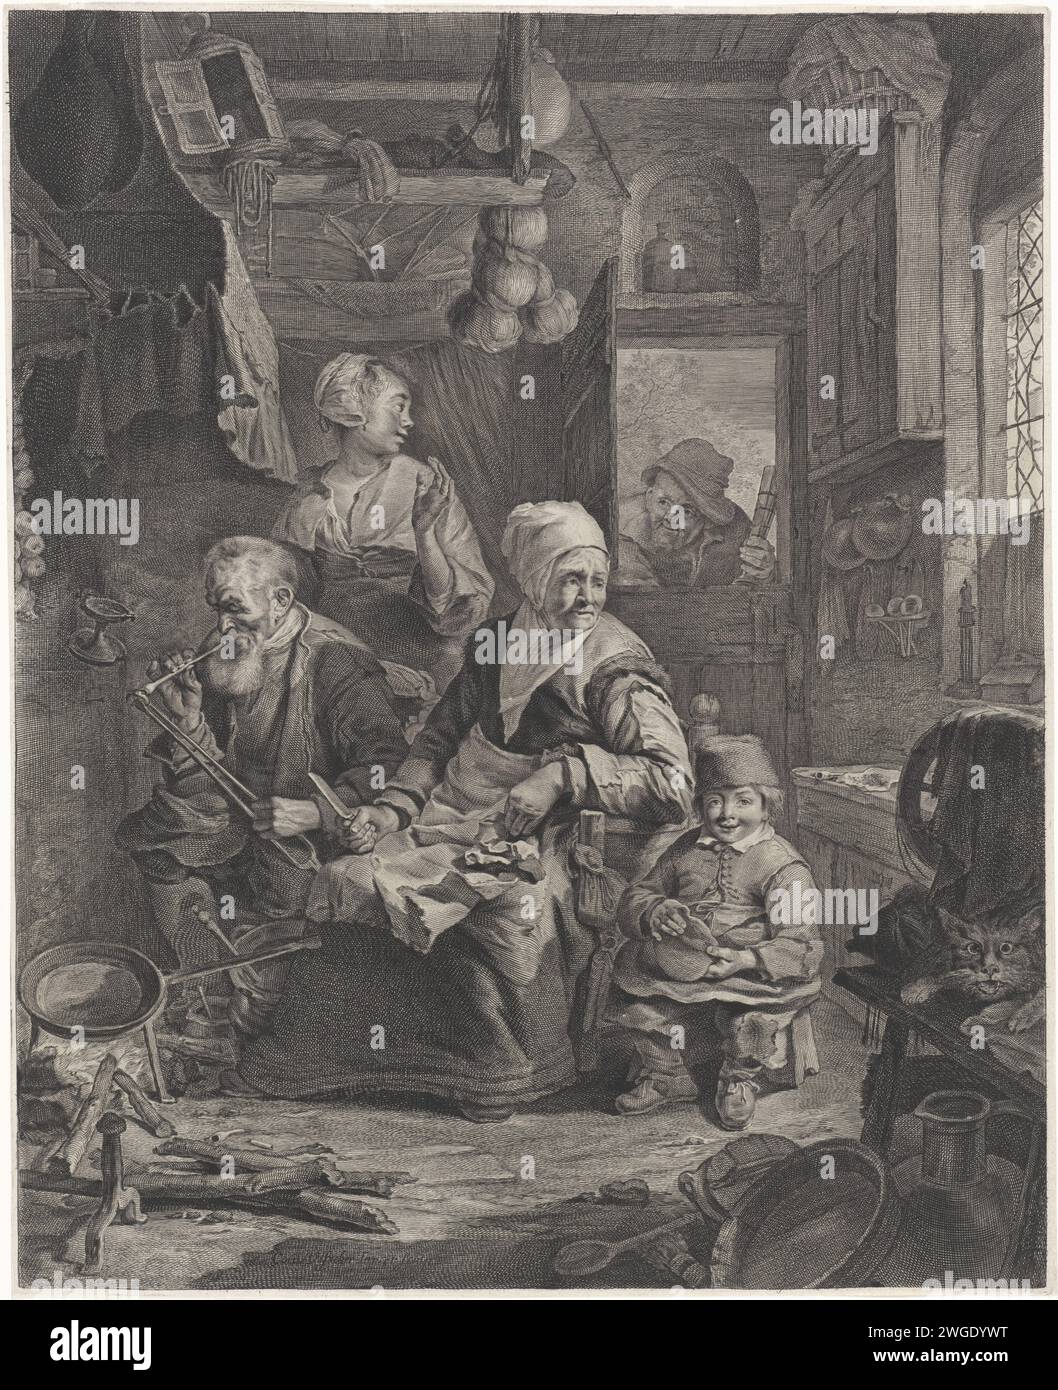 Pancake Bakster, Cornelis Visscher (II), 1638 - 1702 print In a kitchen an old woman is baking pancakes for a fire. The frying pan is on the fire. Next to her a man with a pipe and a child with a pancake. Behind the smoking man a young woman and a small child. In the doorway is an old man with a glass. On the right a cat. Haarlem paper etching / engraving pancakes. kitchen-interior. cat. pipe  tobacco Stock Photo